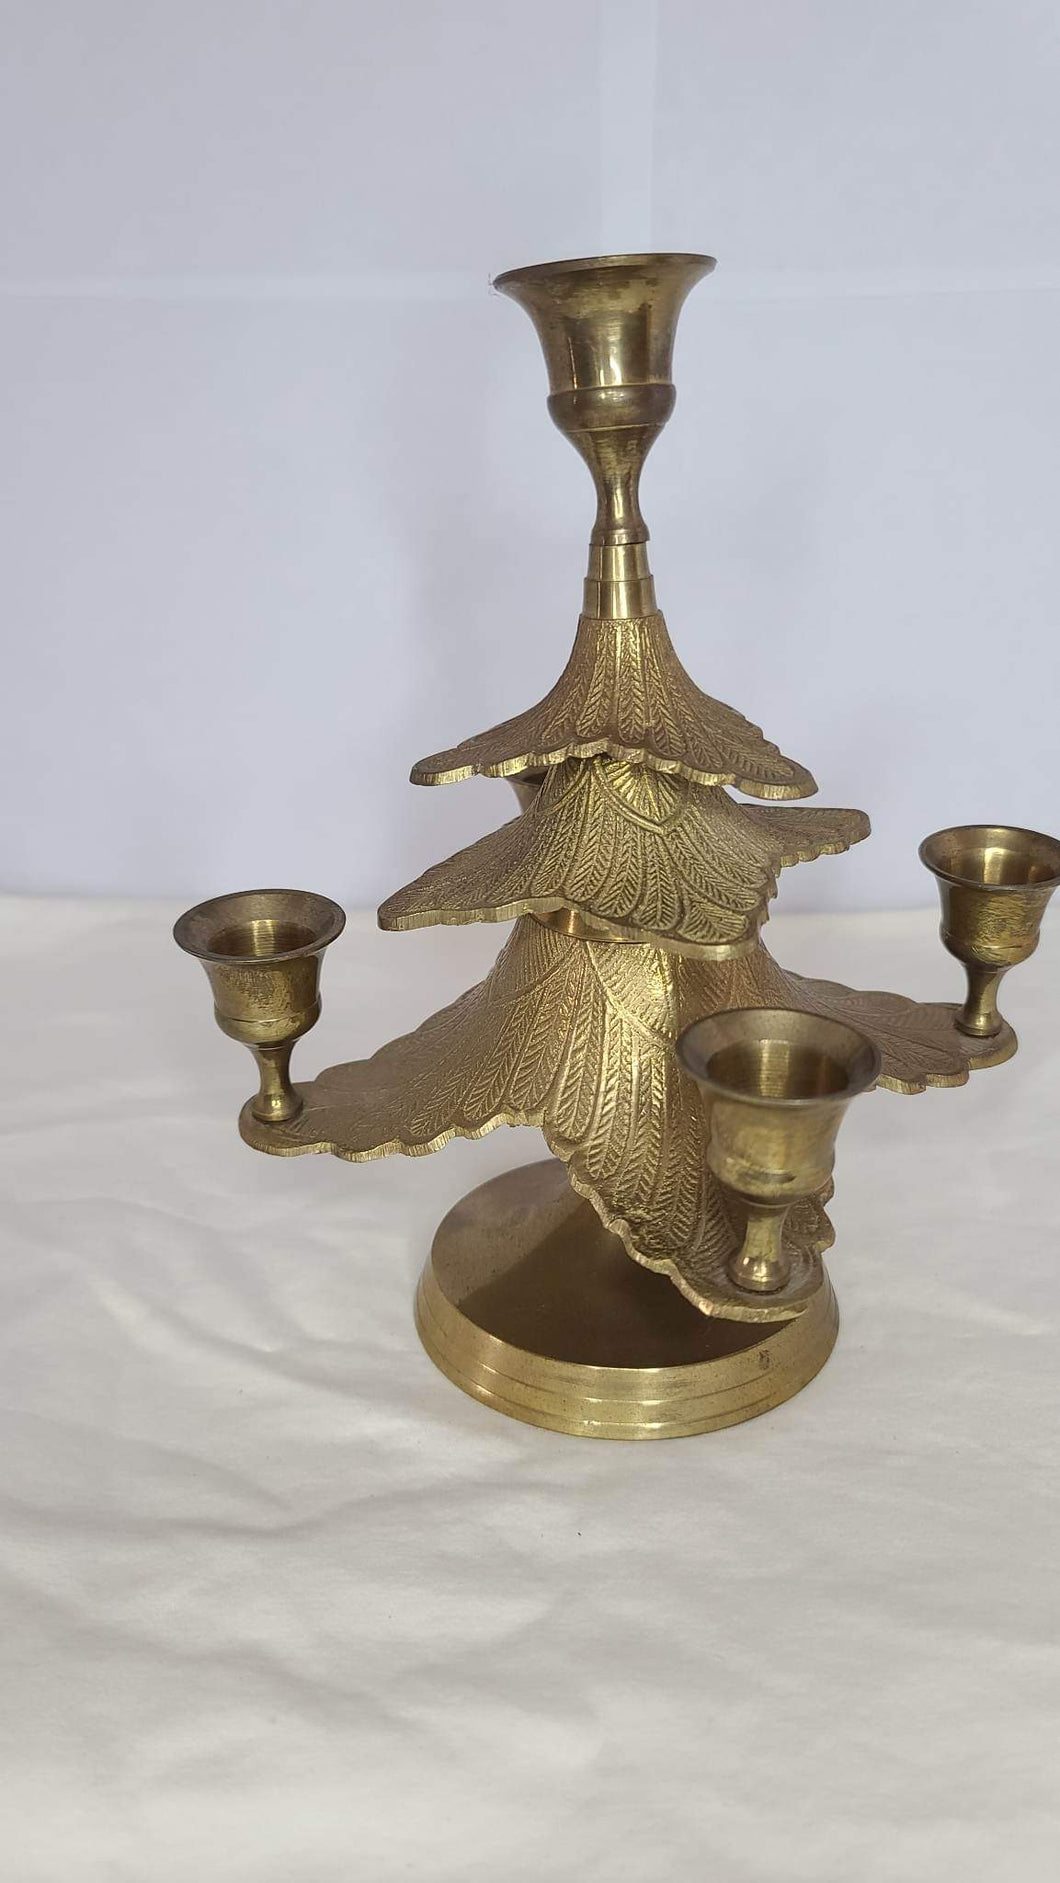 Vintage Solid Brass Candleholder Made in India